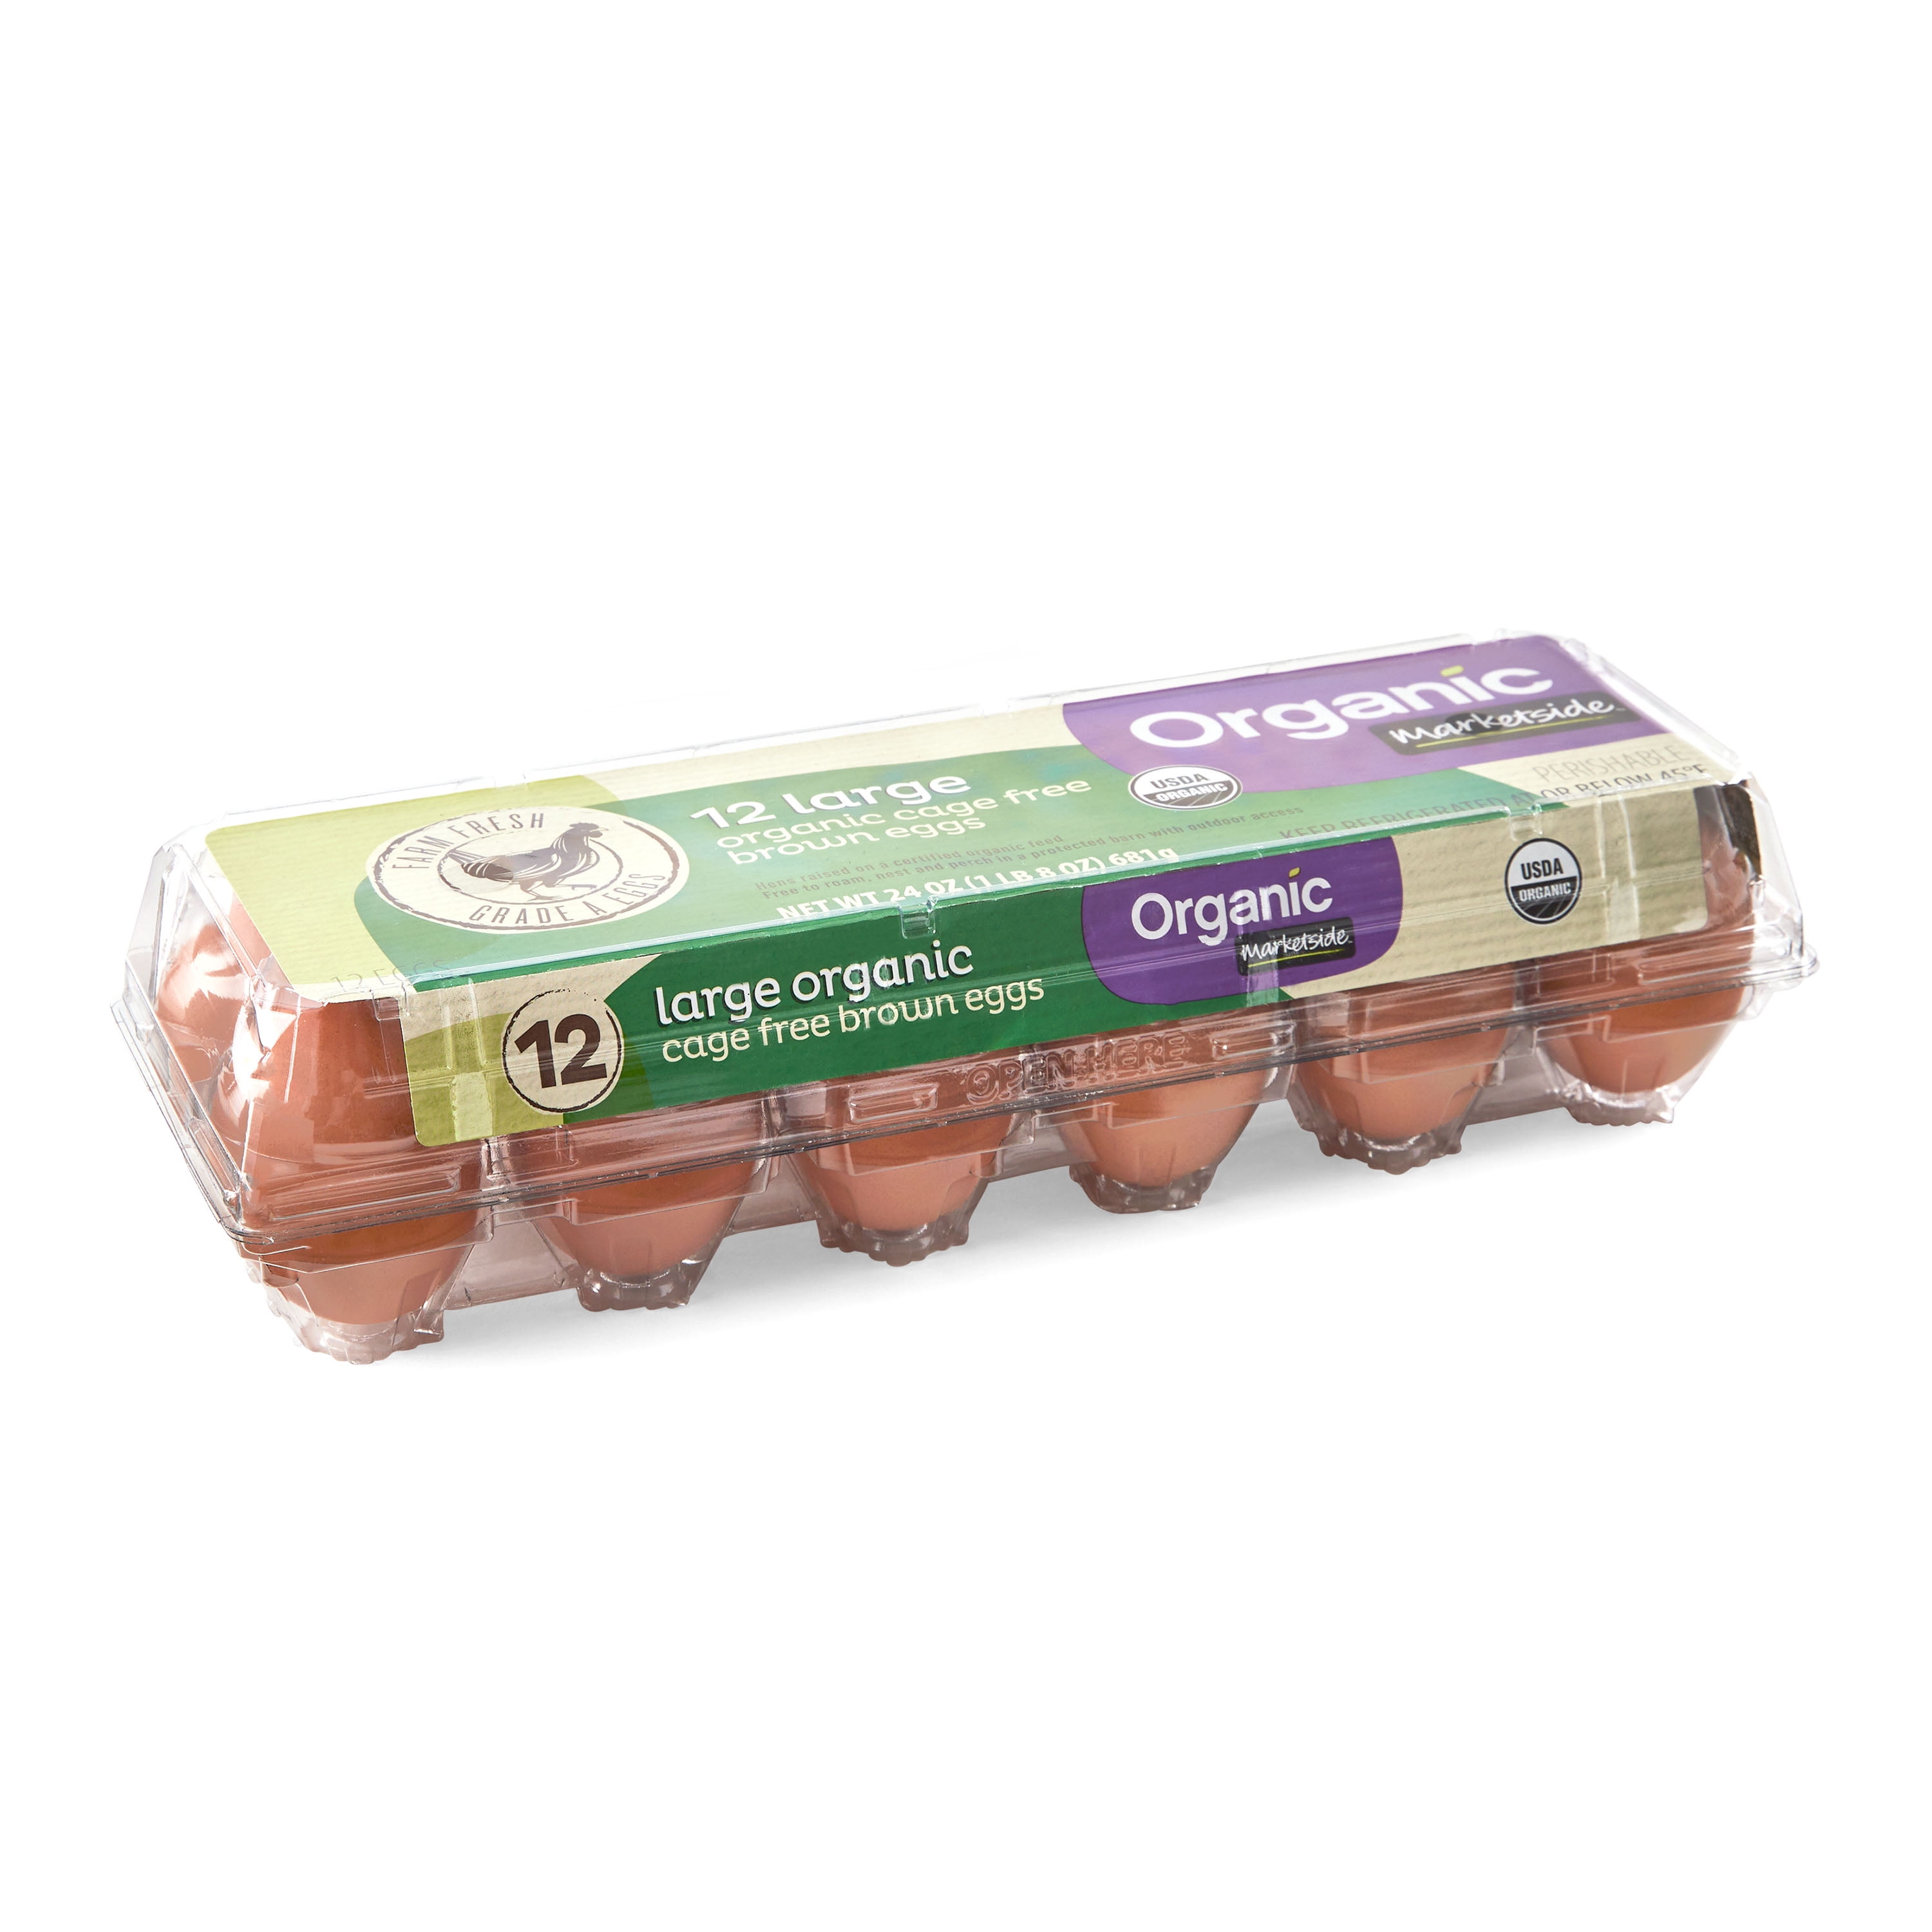 Marketside Organic Cage Free Large Brown Eggs, 12 Count